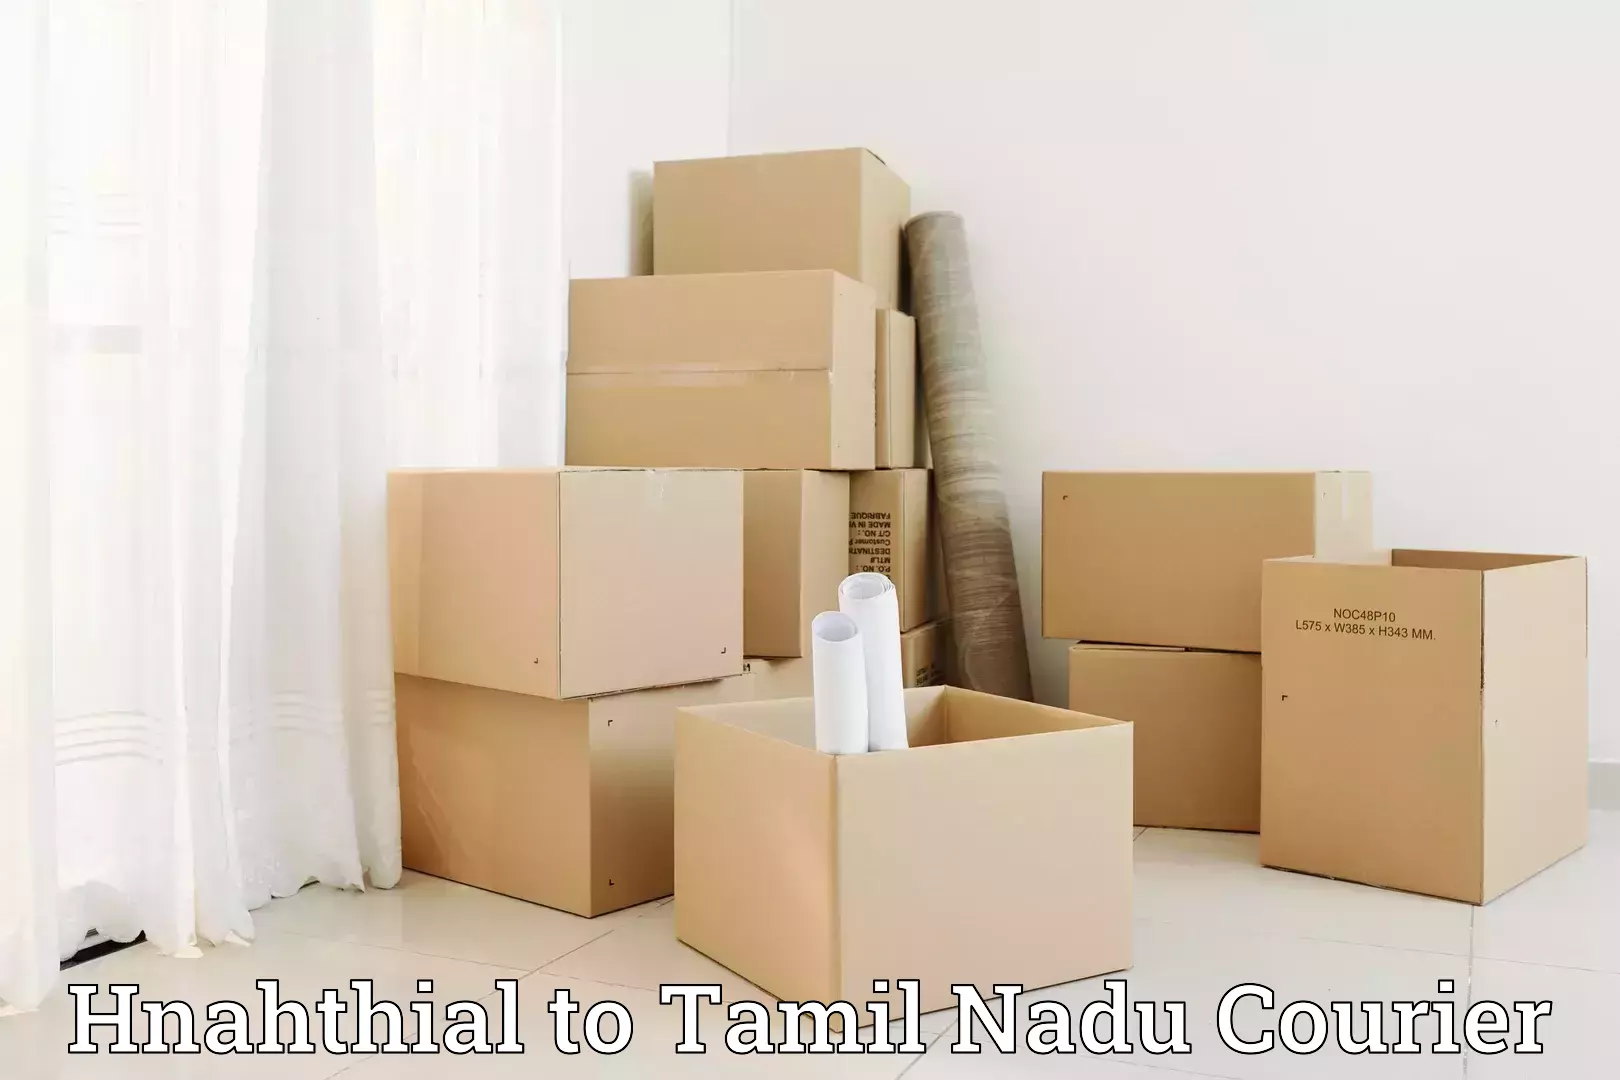 Furniture transport service in Hnahthial to Tamil Nadu